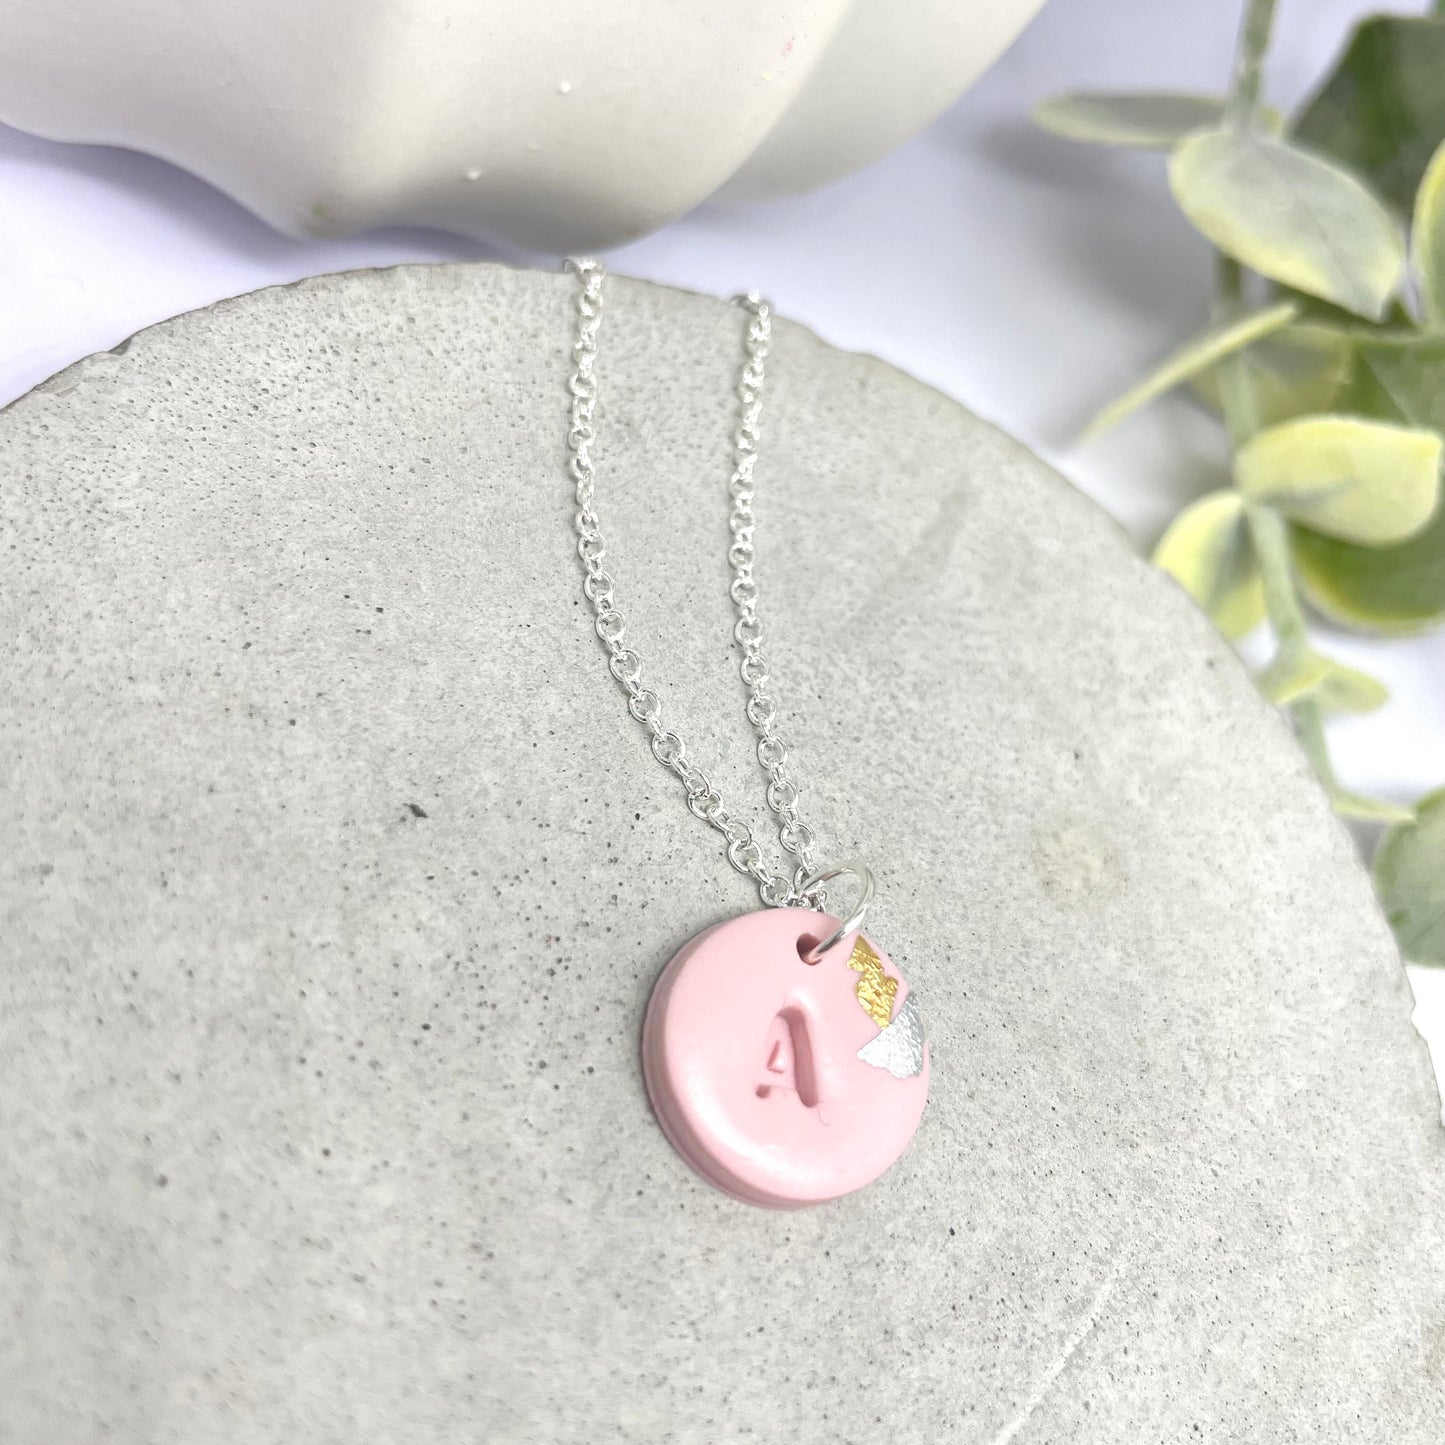 Initial necklace, letter necklace, beautiful birthday gift for her, best friend gift, girlfriend gift, bridesmaid gift, A necklace